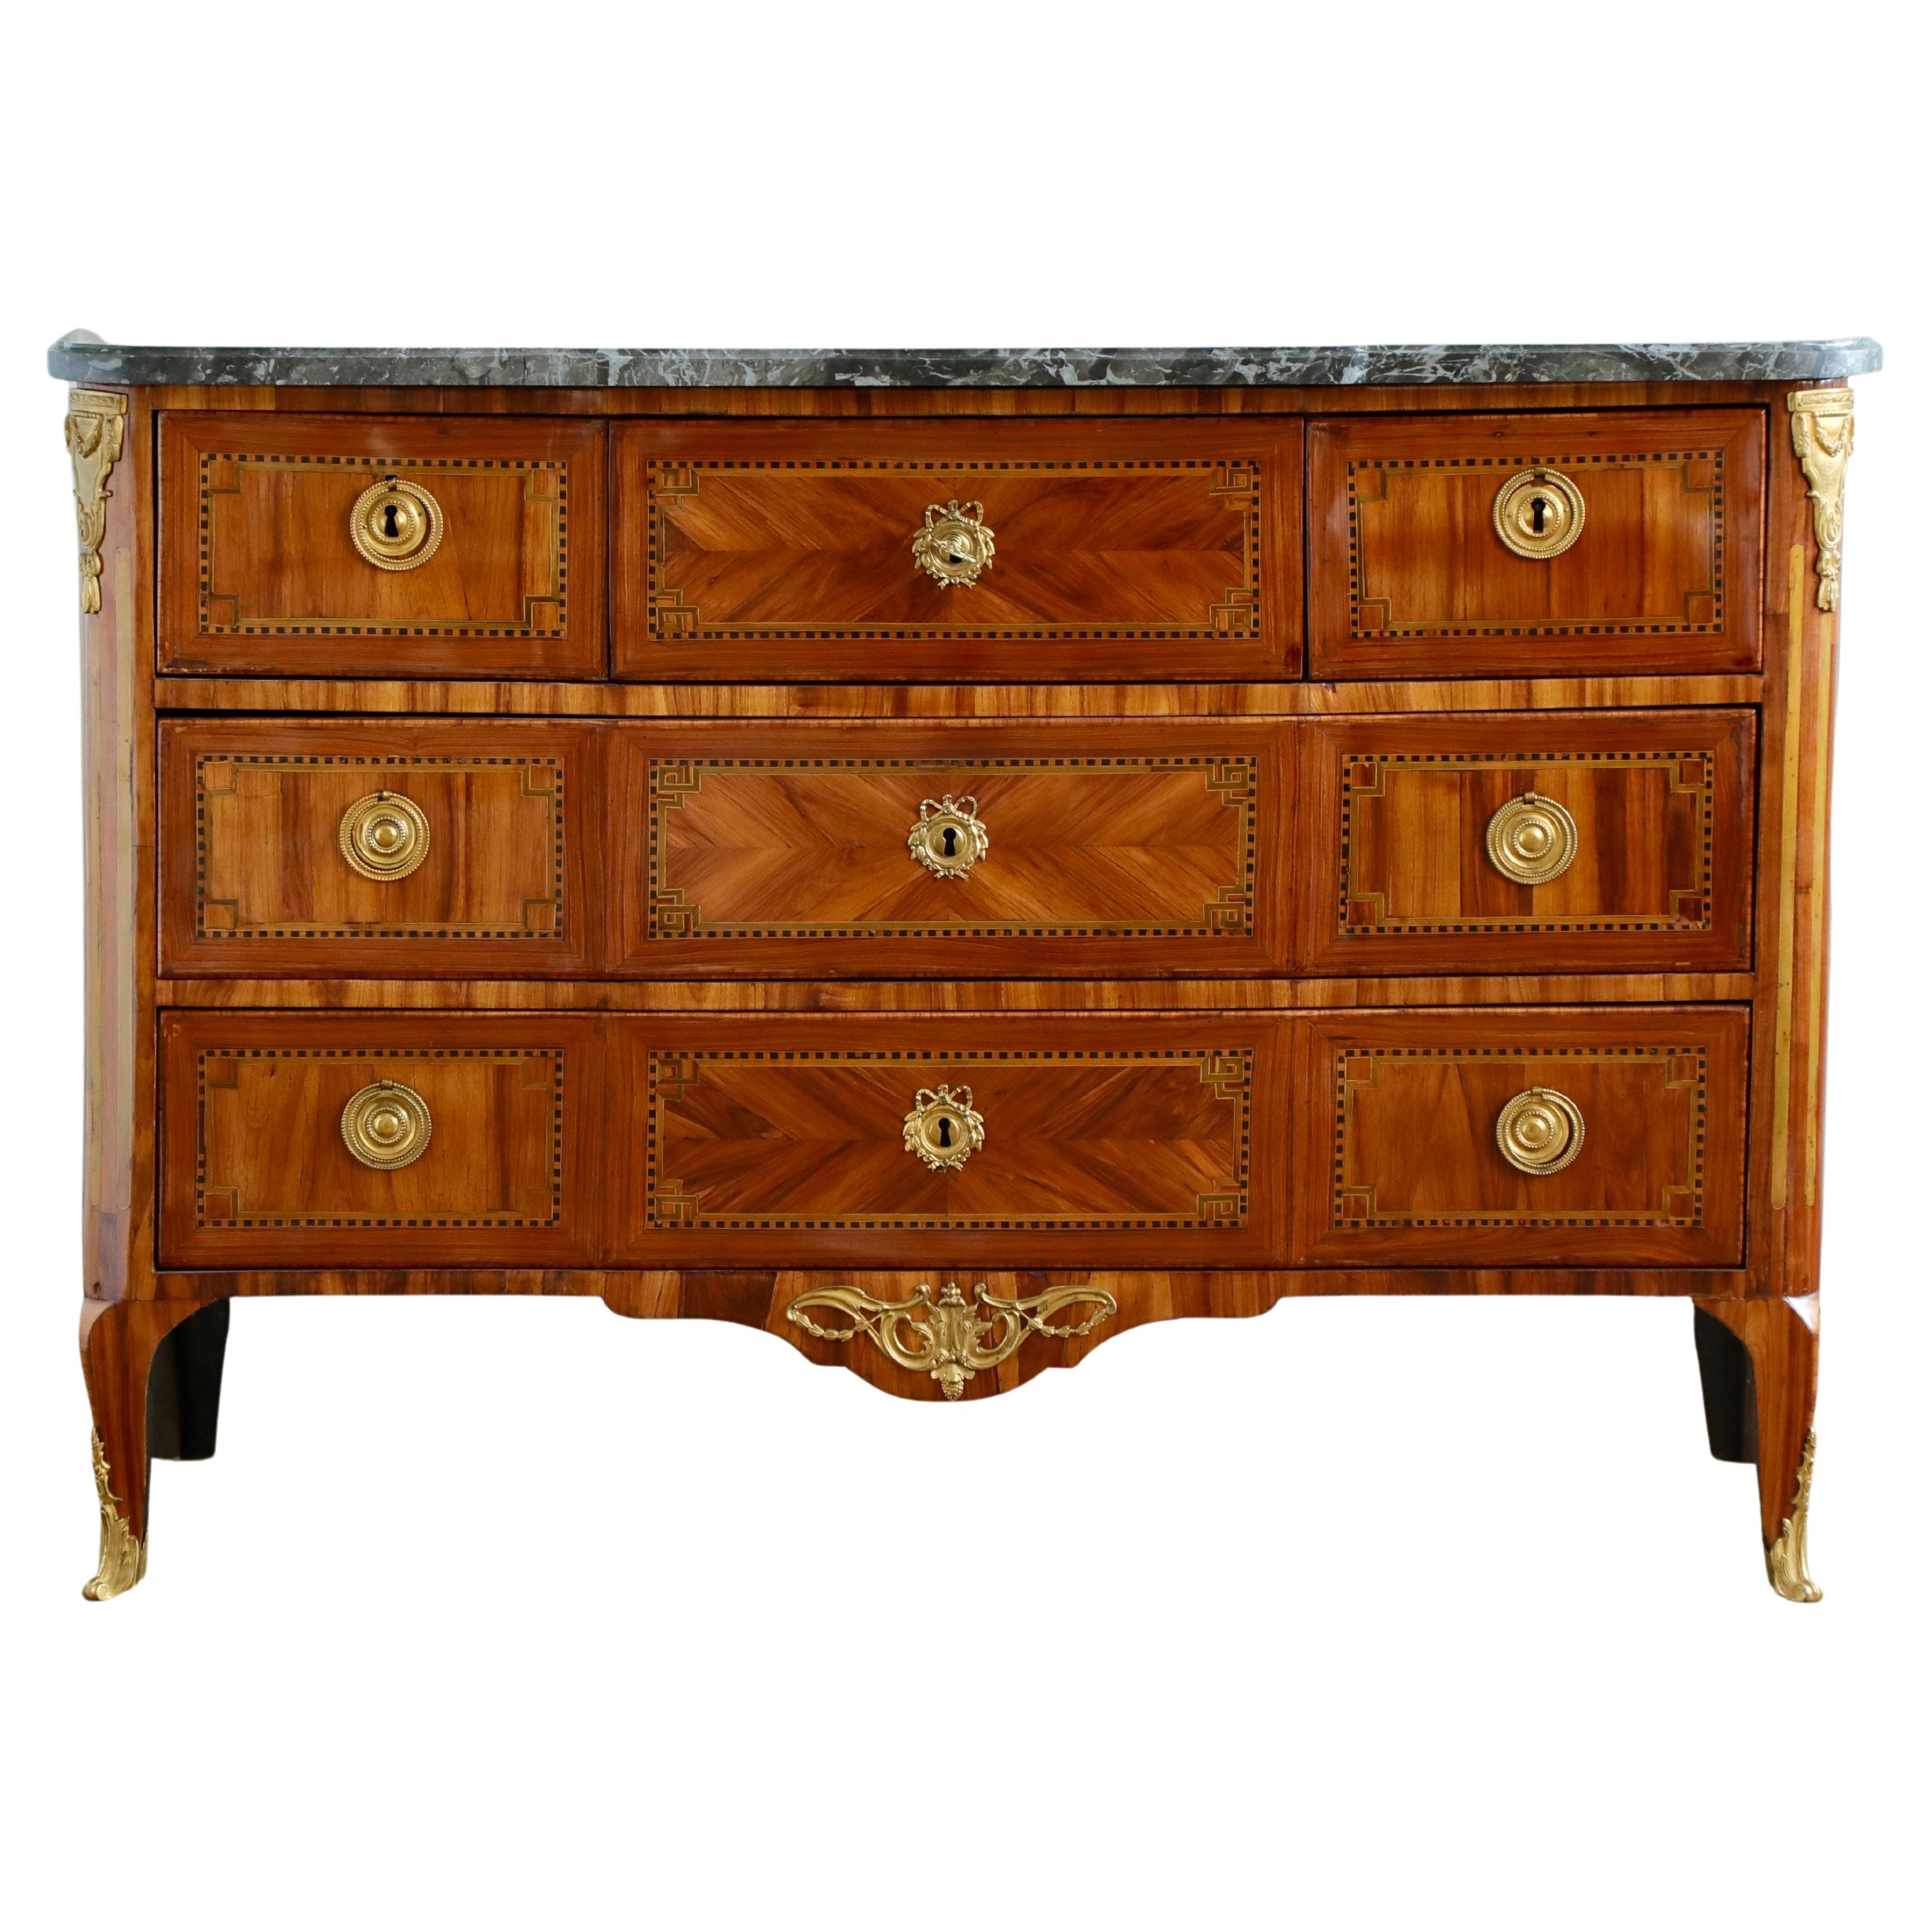 Bois de rose et Palissandre Marquetry Commode from the Transition Period (LouisXV/Louis XVI)
Stamped L.Aubry pour louis Aubry (made Master the 31 August 1774)
5 drawers on 3 levels framed with boxwood lines marquetry.
The marble top is a gris